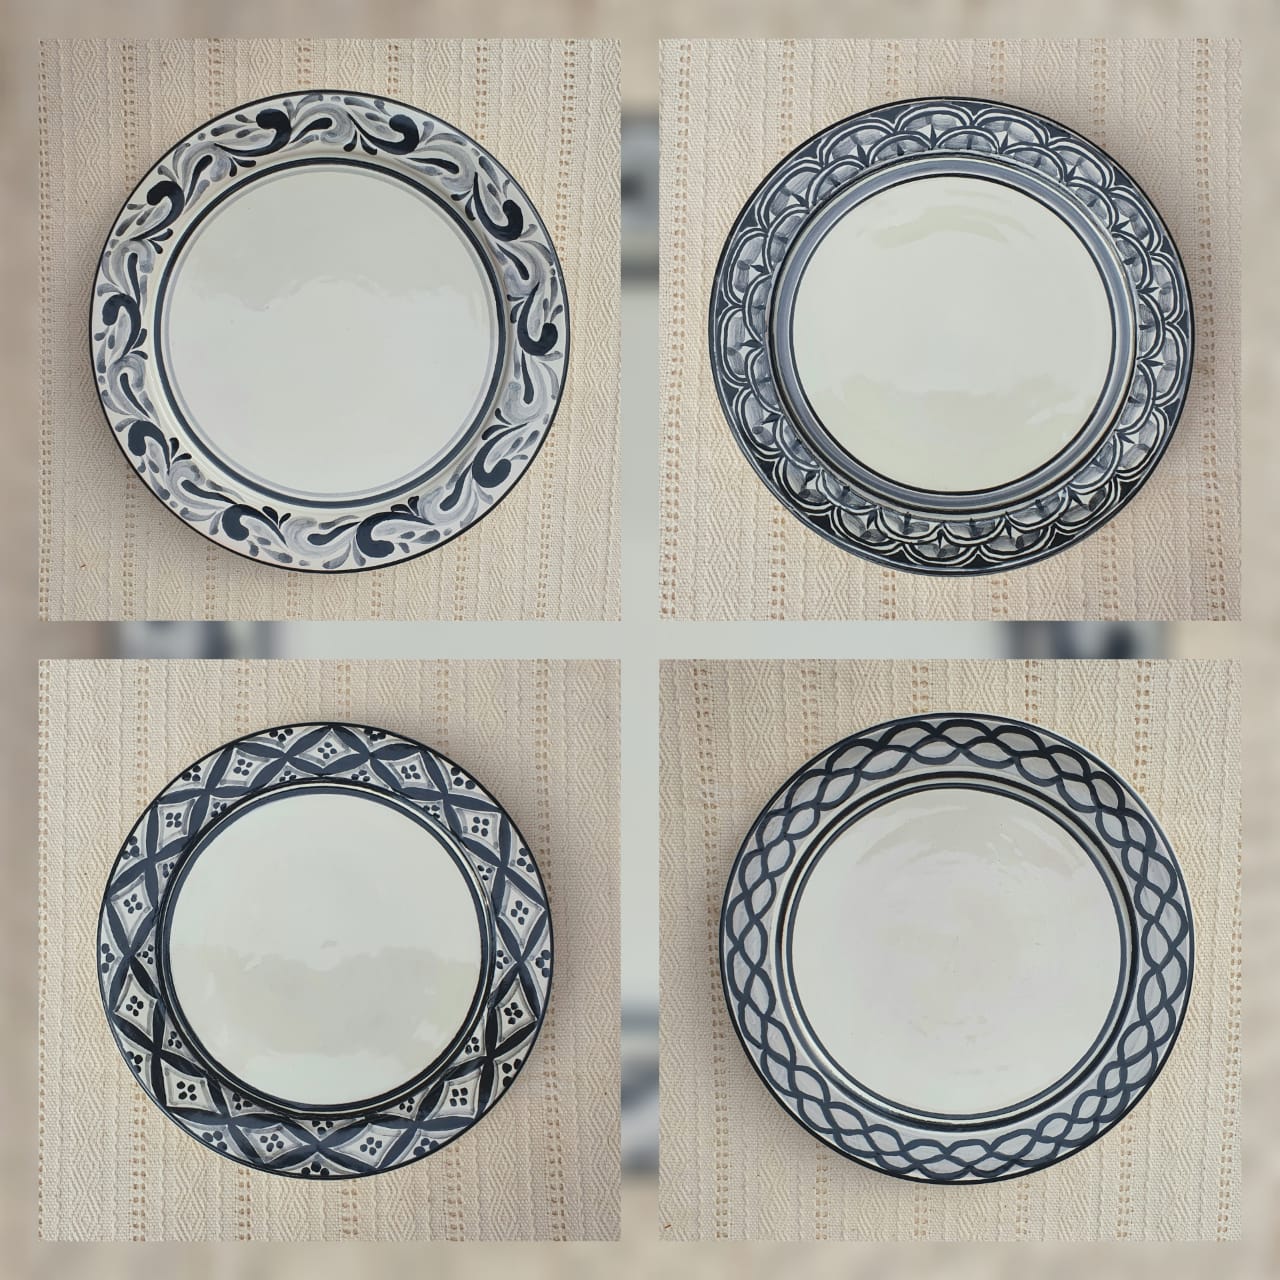 Plate with assorted border Set of 4 pieces Black and White